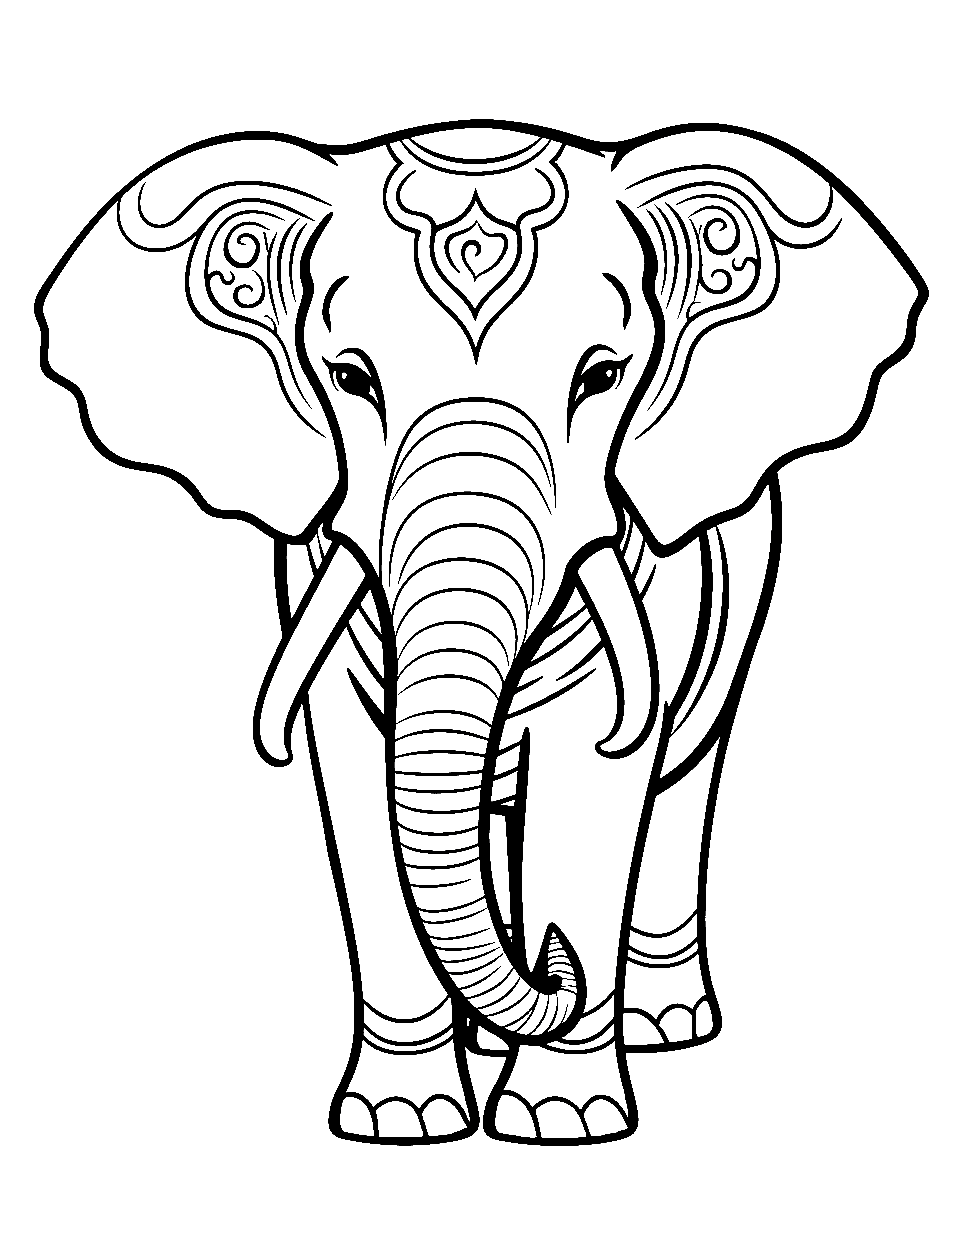 Indian Elephant with Decor Coloring Page - A decorated Indian elephant with body painting.